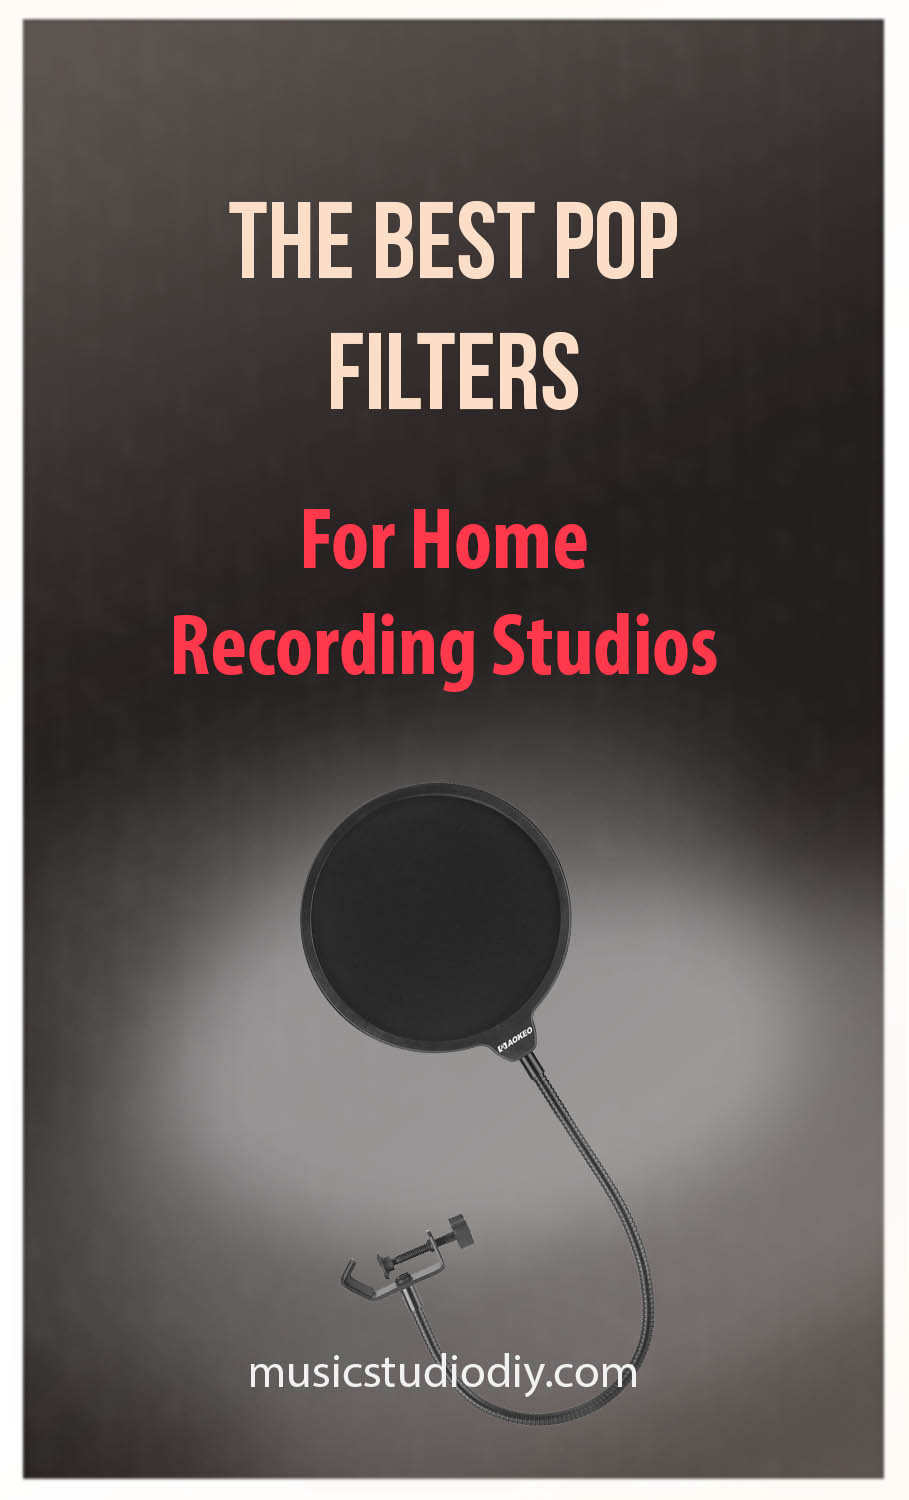 Best Pop Filters for Home Recording Studios